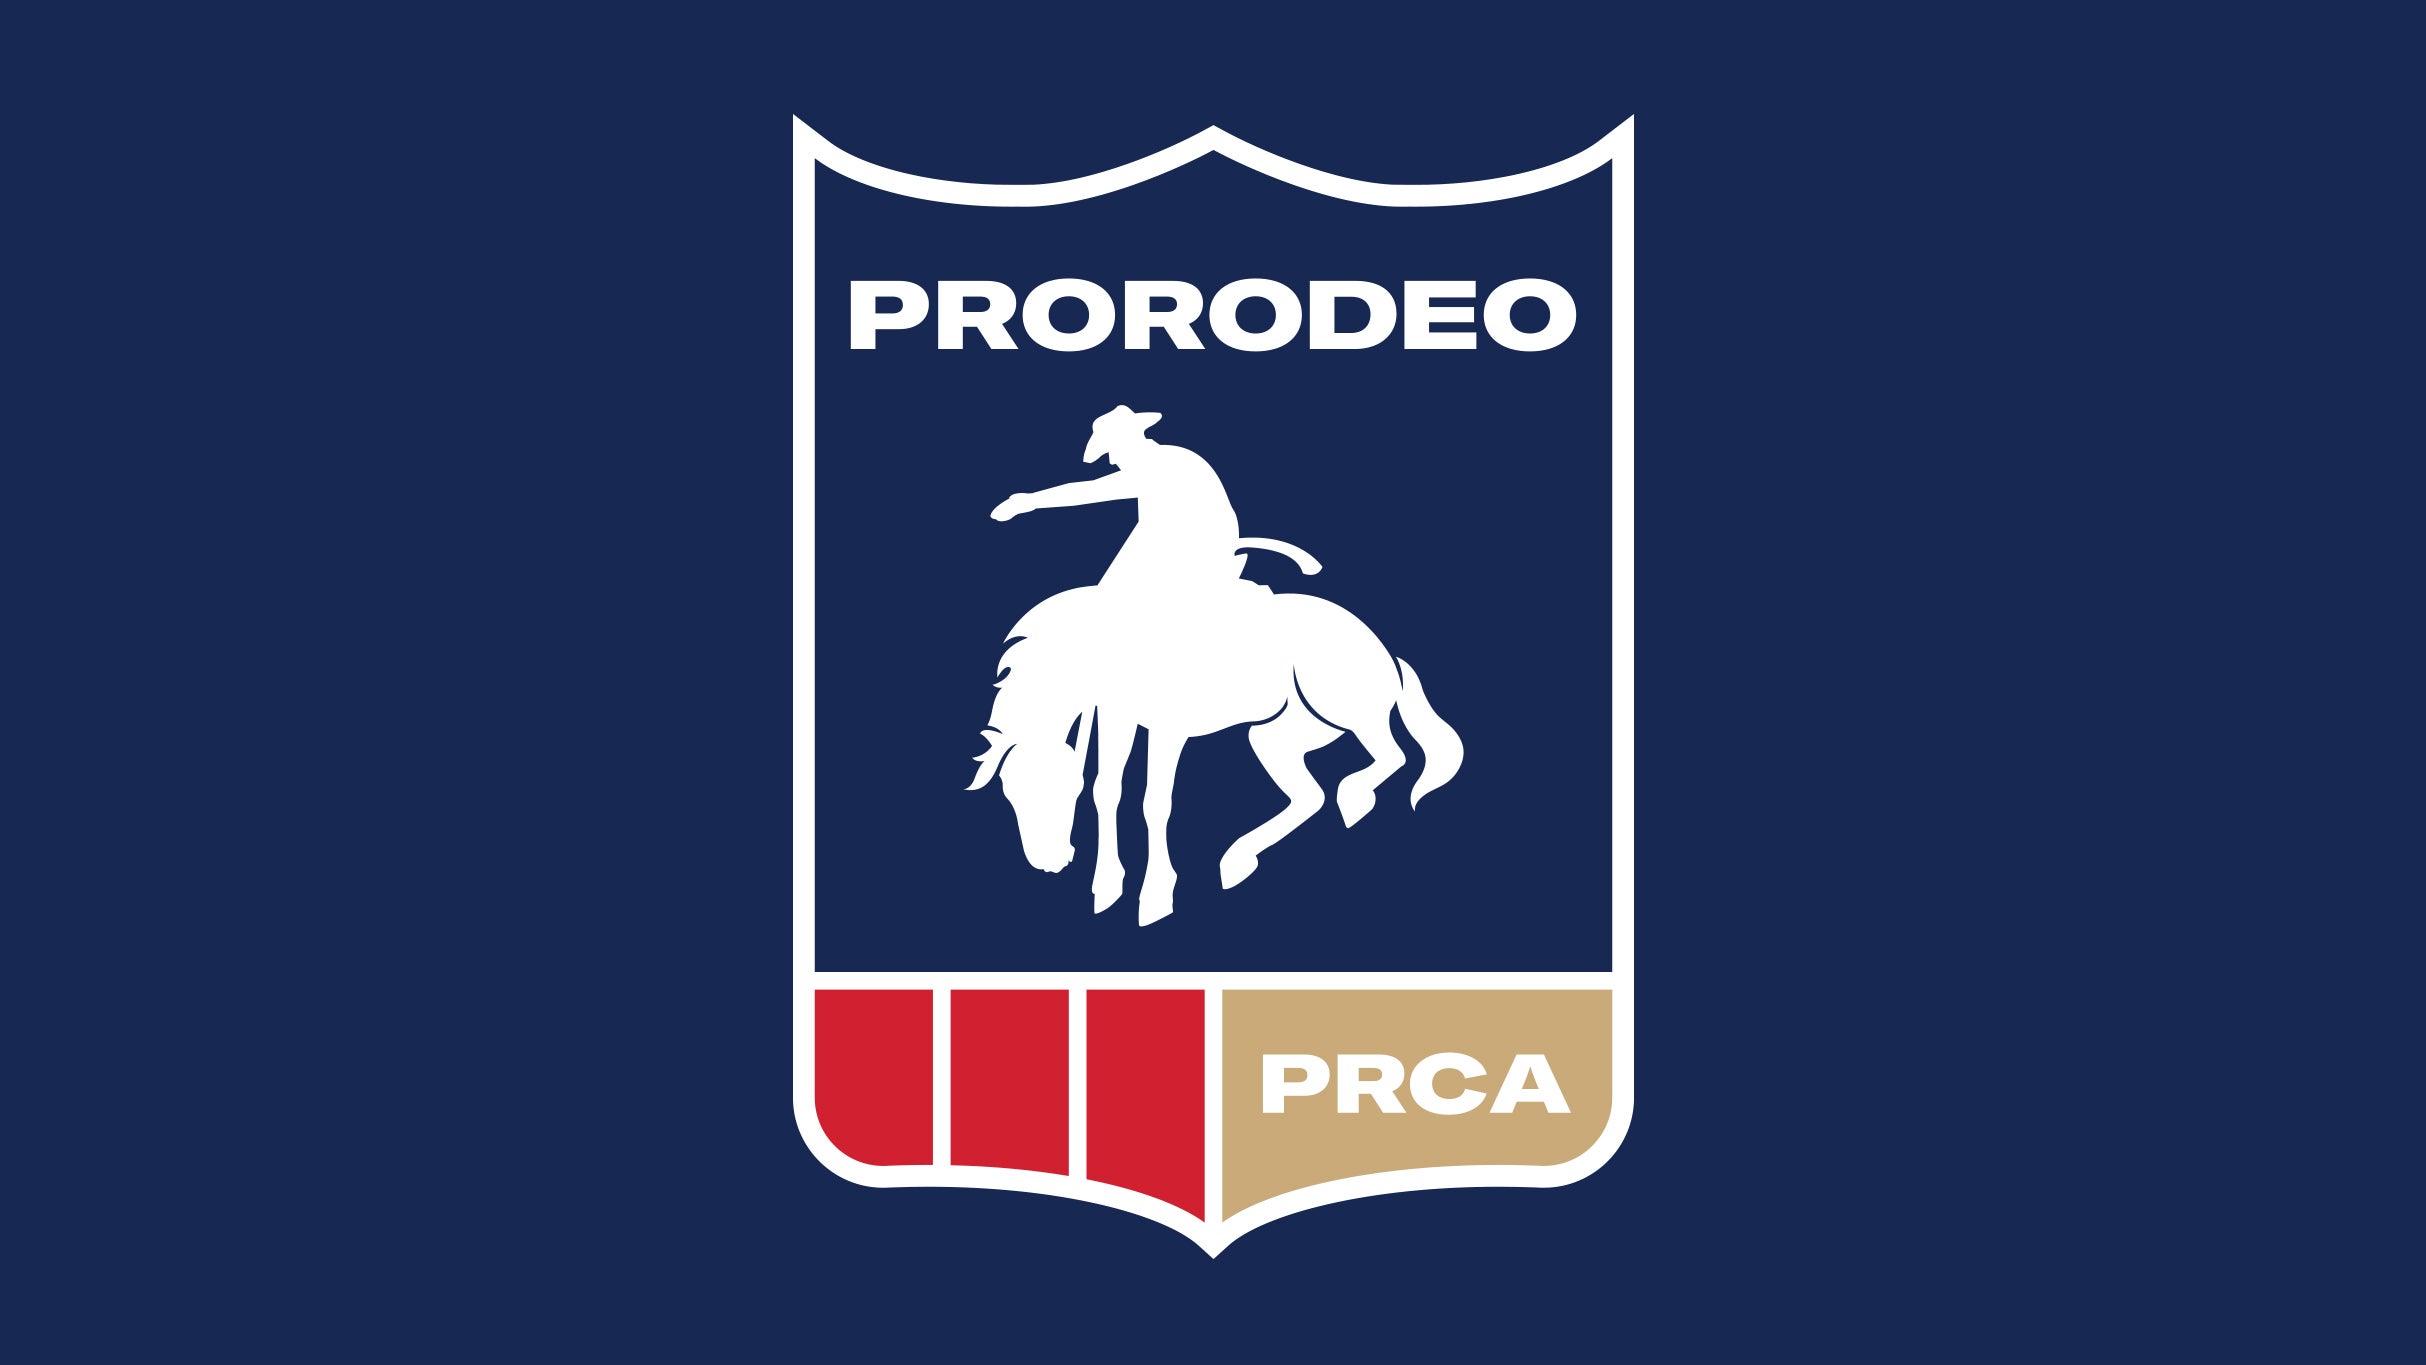 PRCA Championship Rodeo in Park City promo photo for Early Bird presale offer code